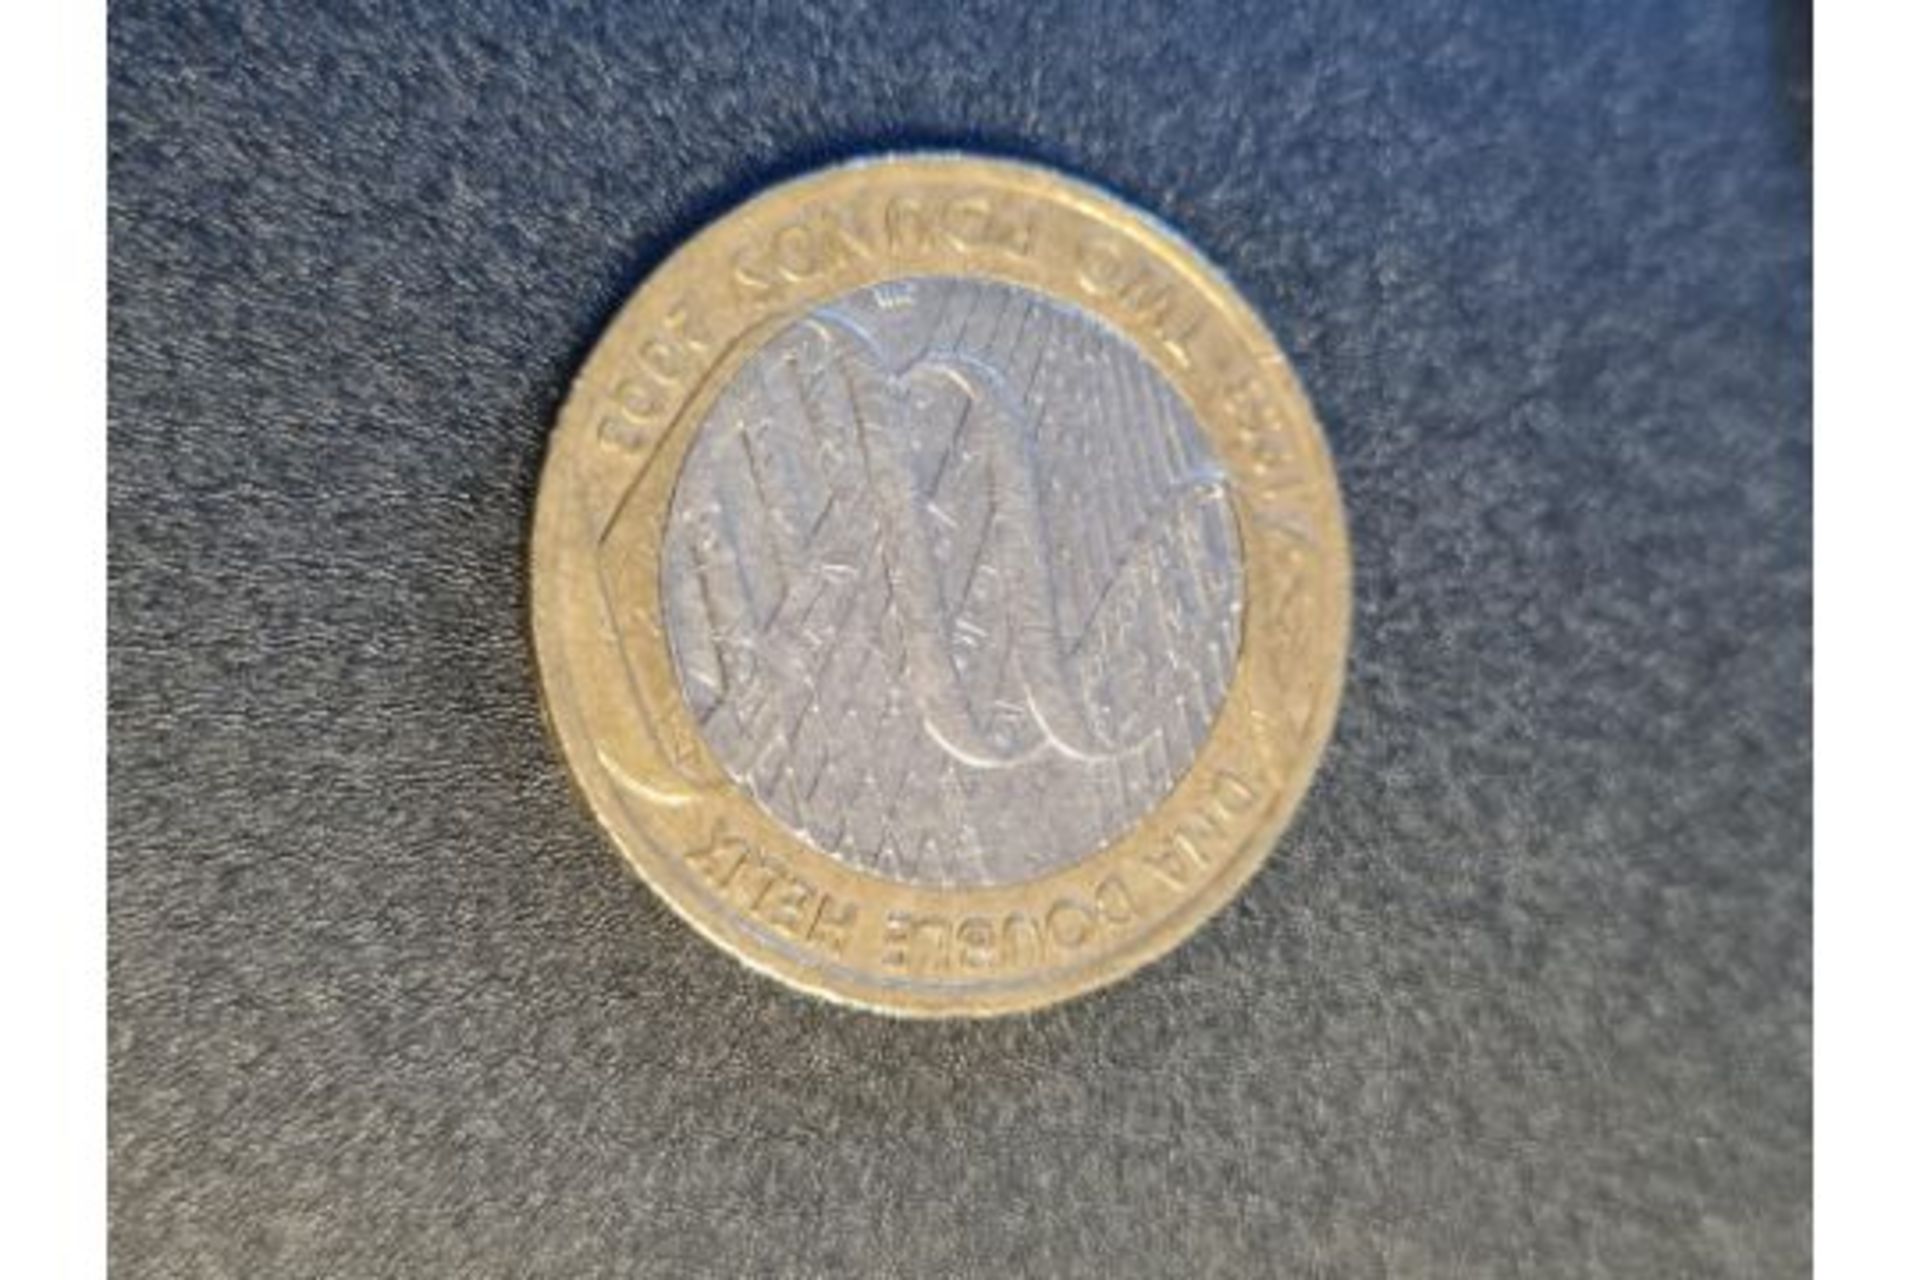 collectors £2 coin